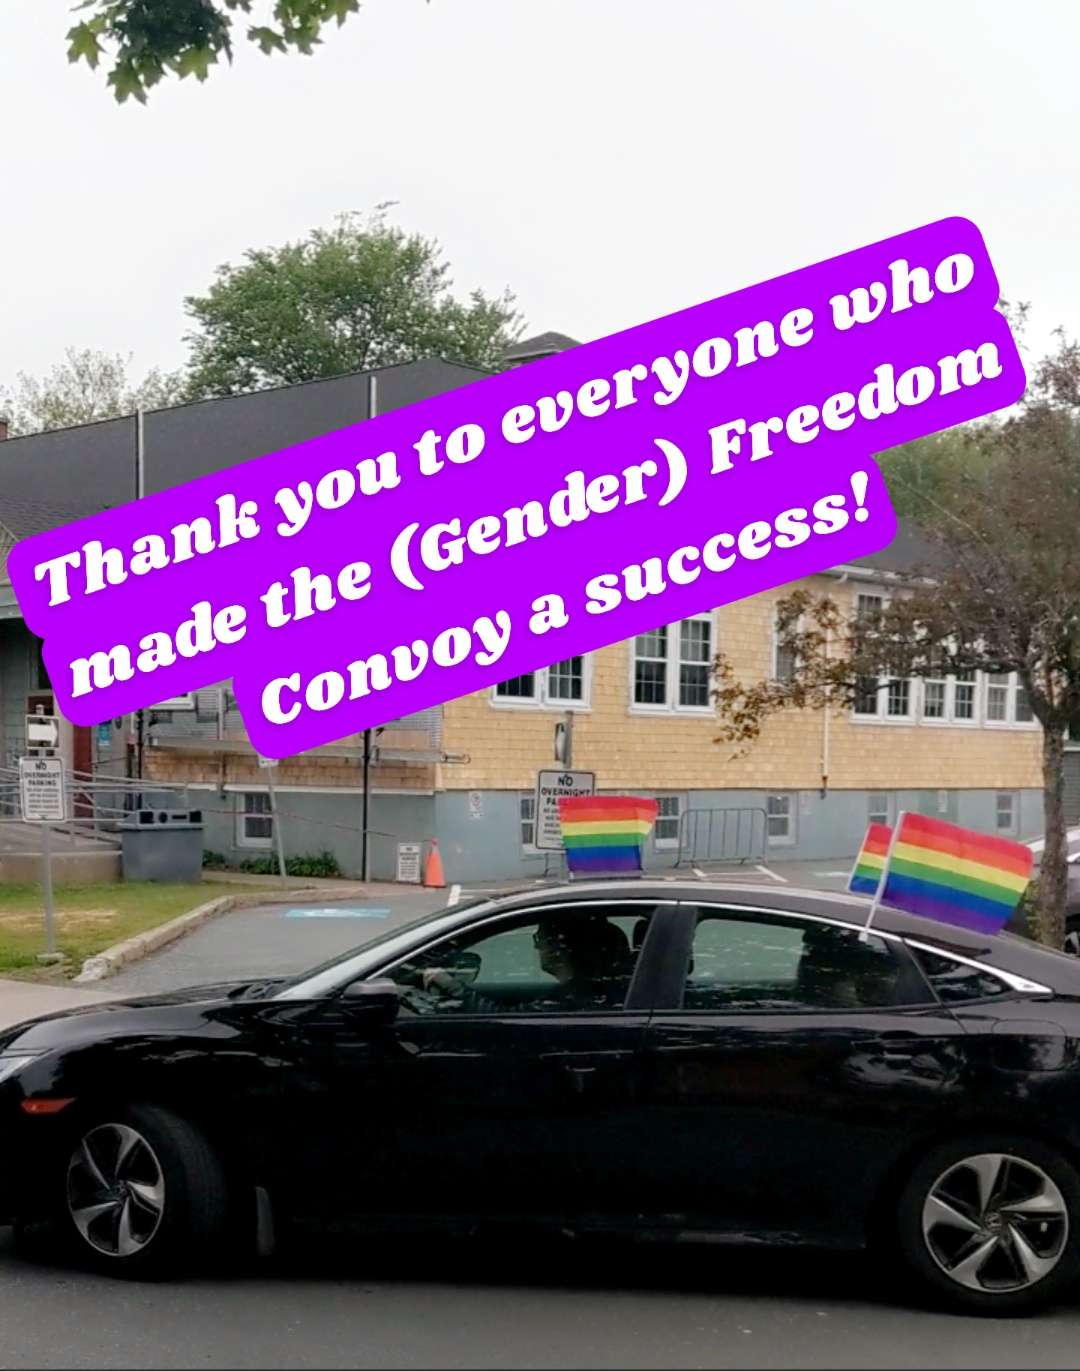 black car with rainbow flags and caption "Thank you to everyone who made the (Gender) Freedom Convoy a success!